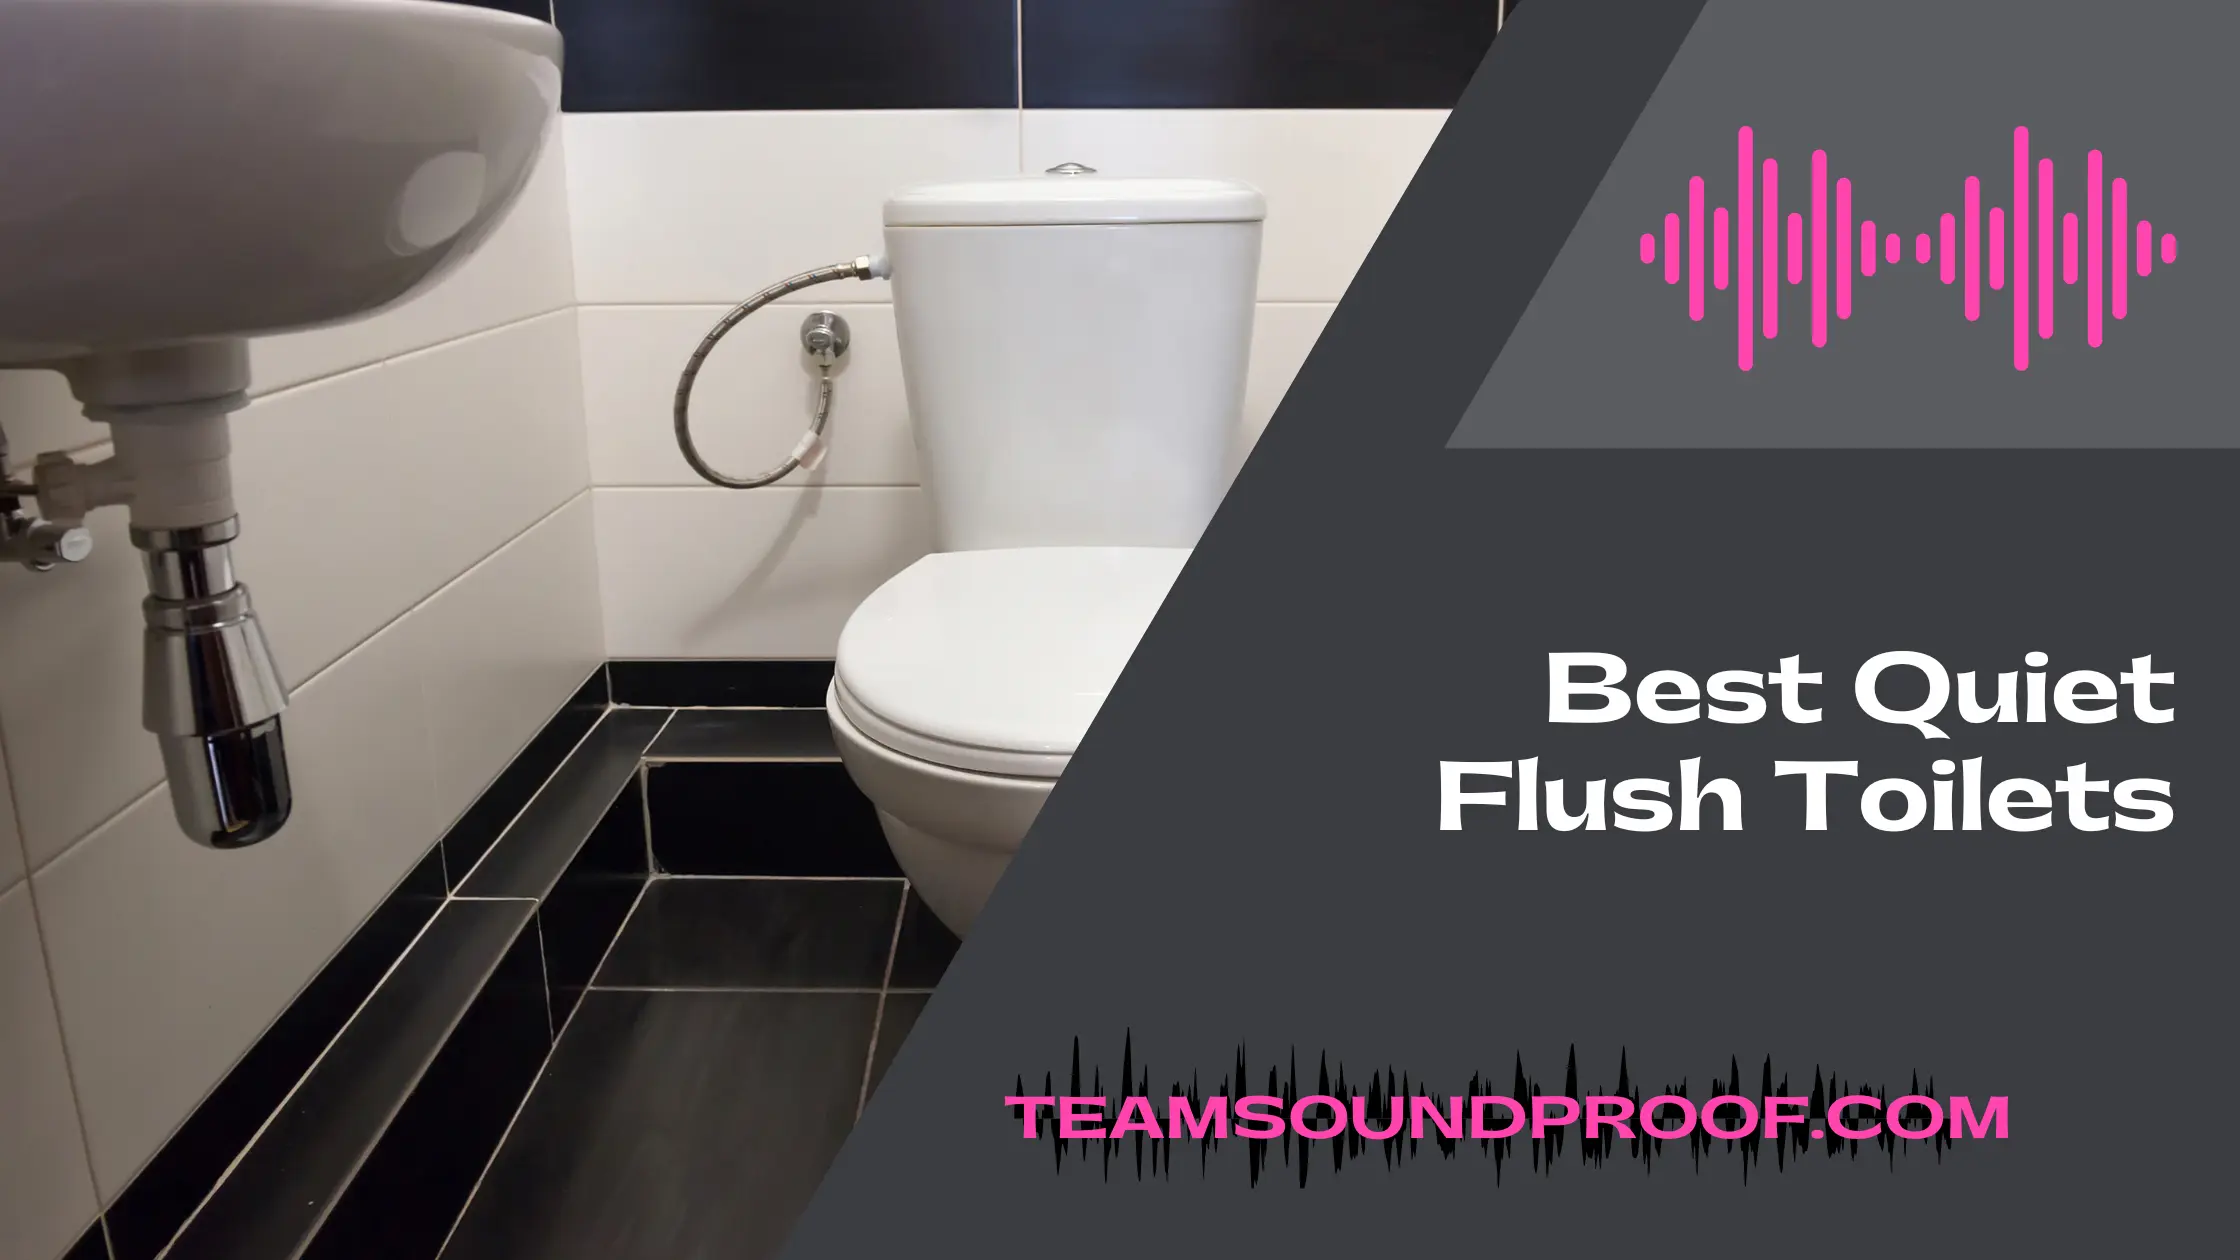 Best Quiet Flush Toilets - Recommended Expert's Guide